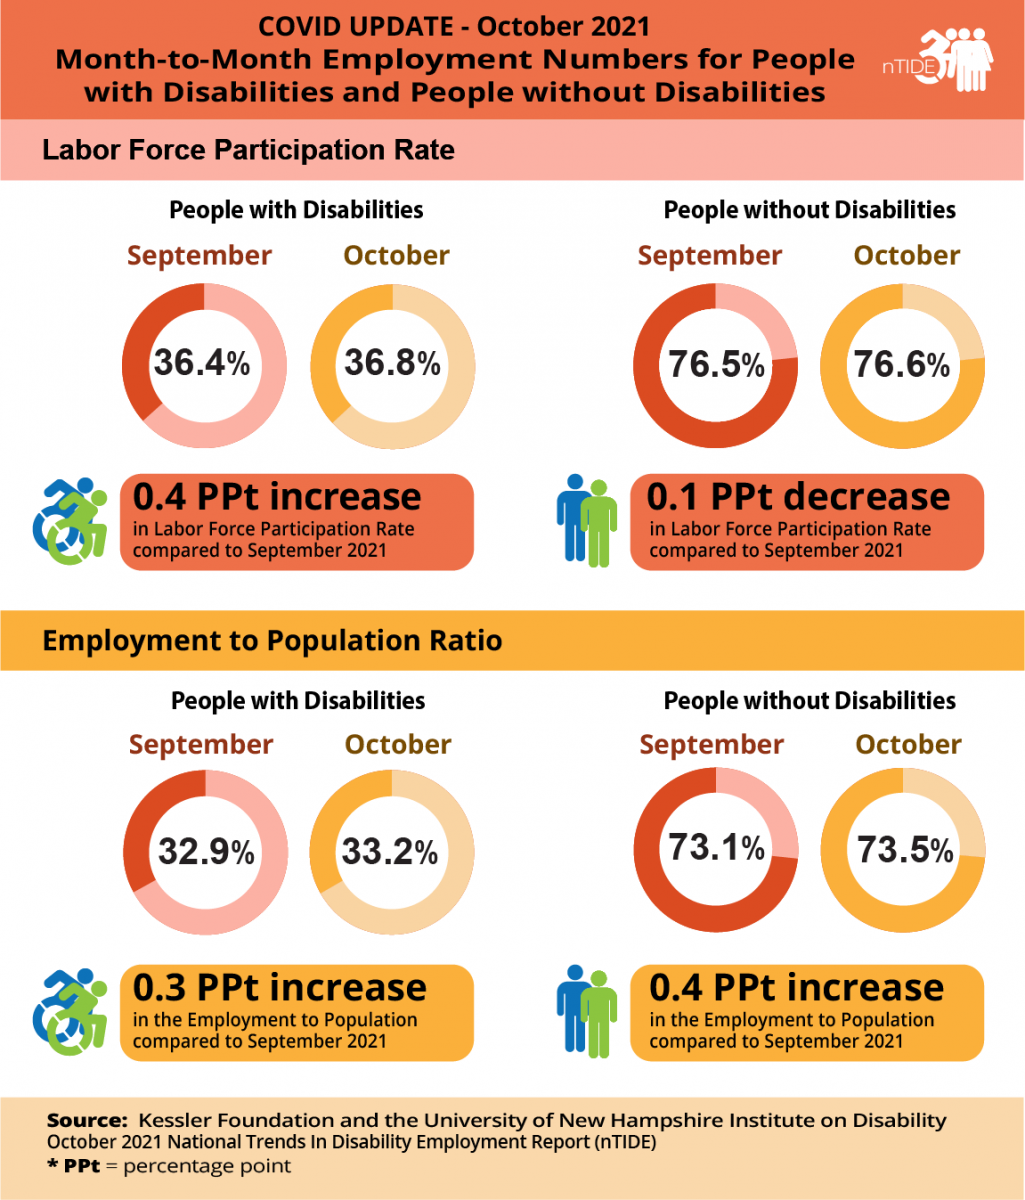 This graphic compares the economic indicators for September 2021 and October 2021, showing increases for people with and without disabilities and is further explained in the paragraph below